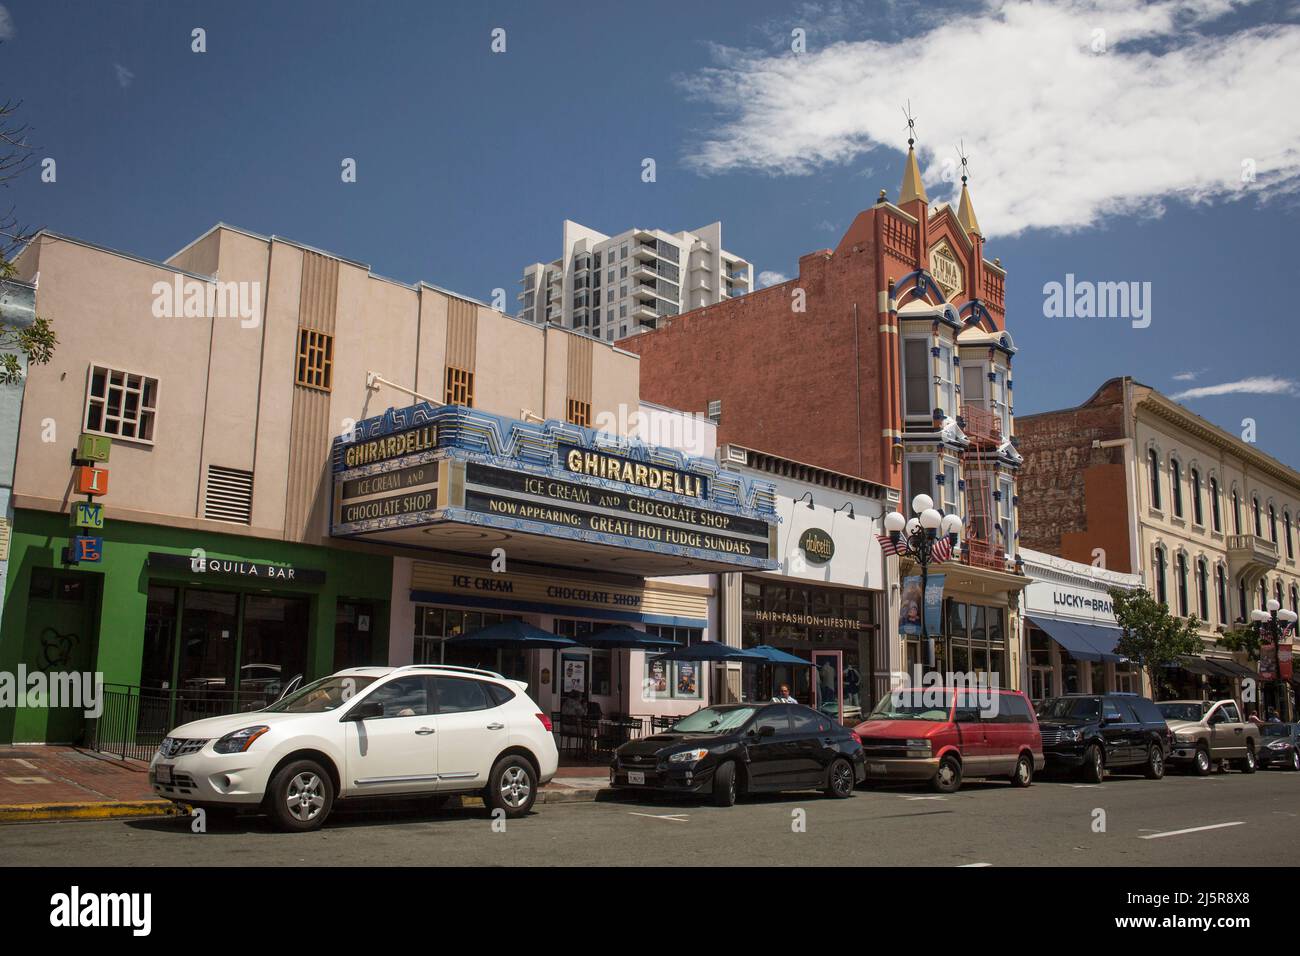 Ghirardelli chocolate shop and the beautiful Yuma building on the 5th Ave of the Gaslamp Quarter, San Diego Stock Photo